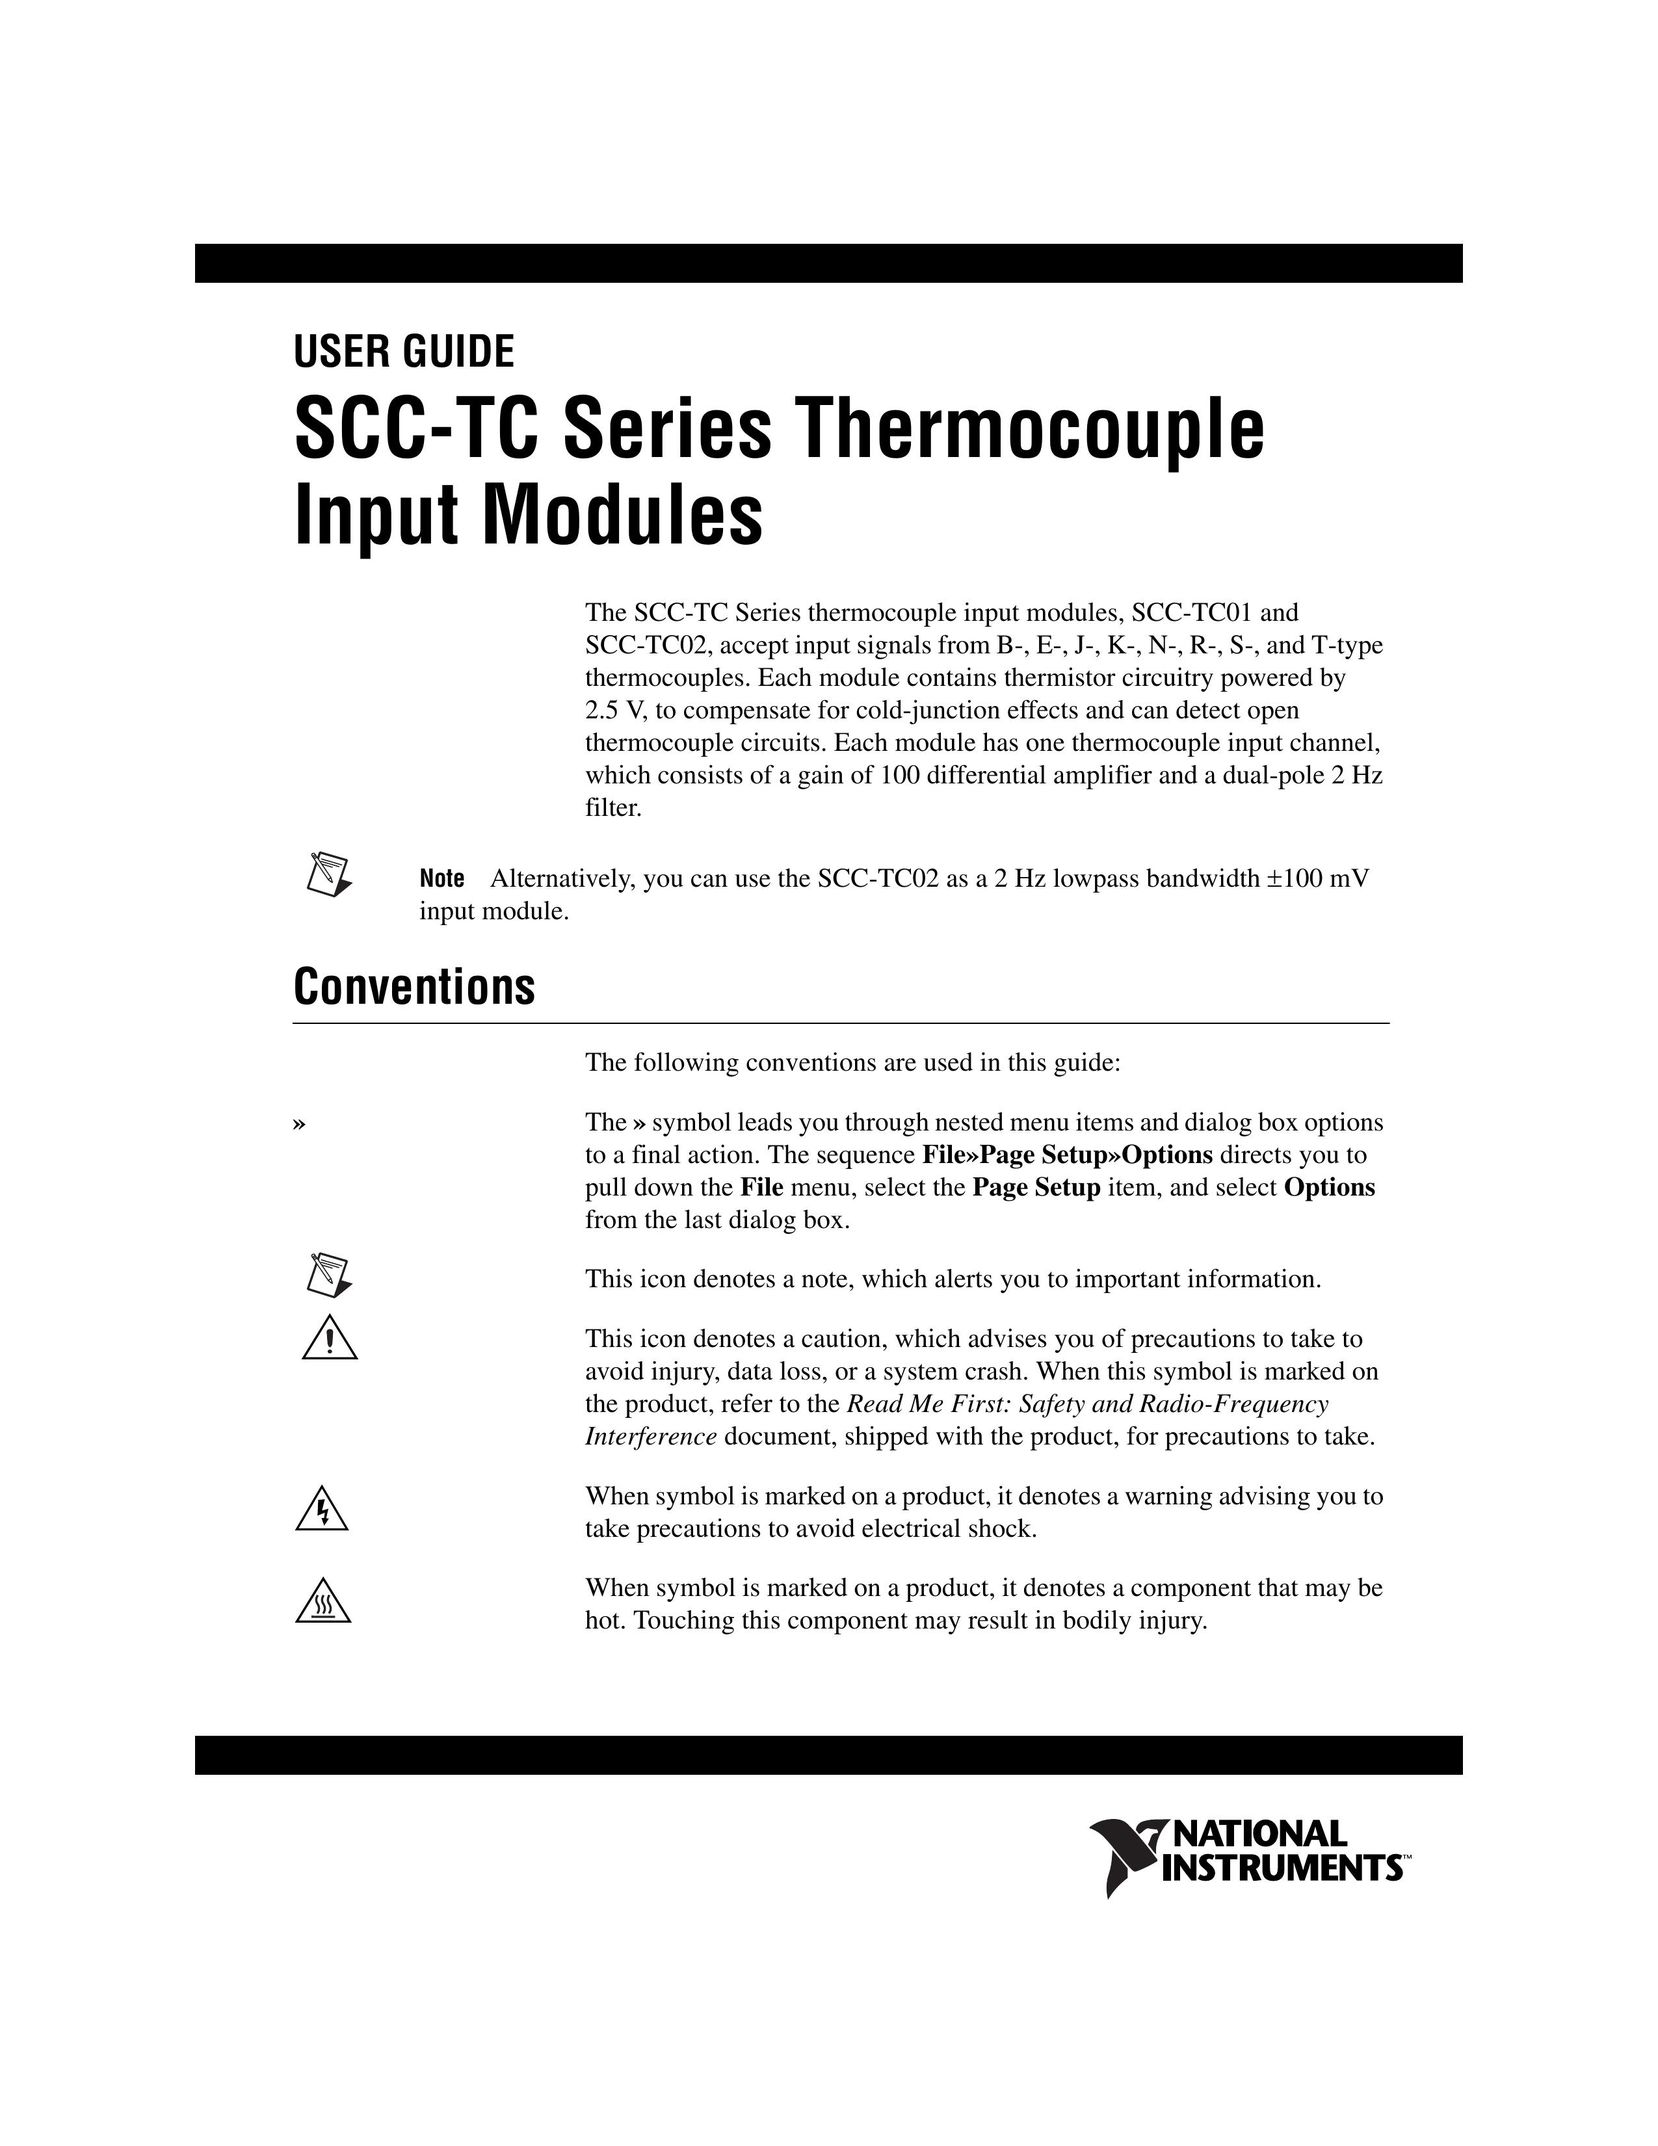 National Instruments SCC-TC Series Thermocouple Input Modules Model Vehicle User Manual